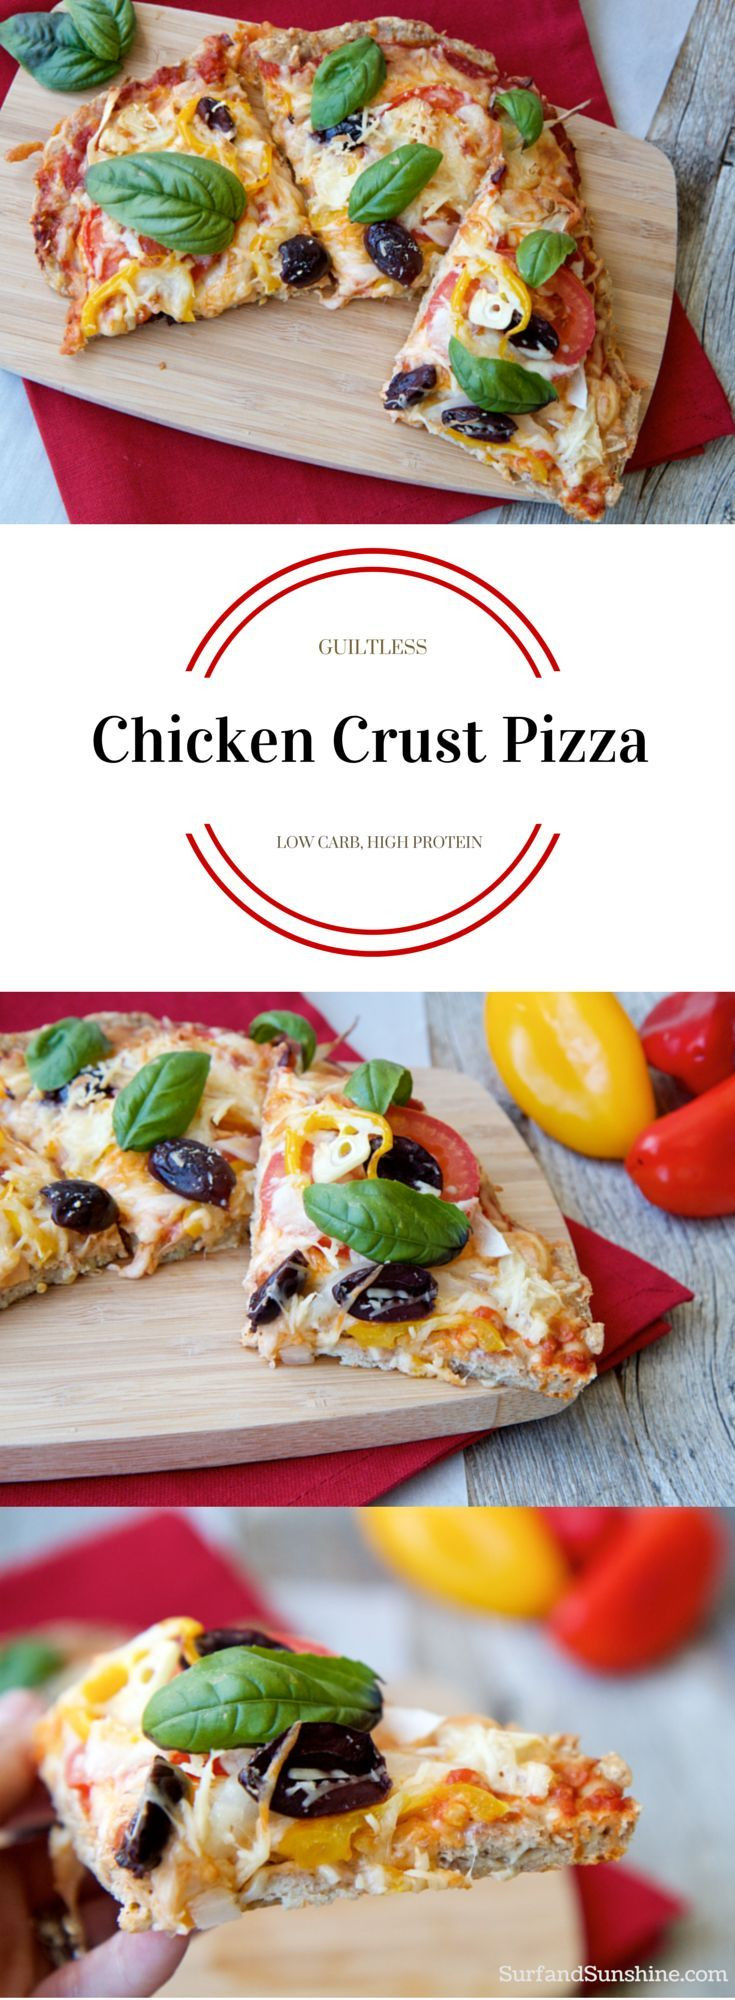 High Protein Low Carb Recipes
 Guilt Free Chicken Crust Pizza Receta